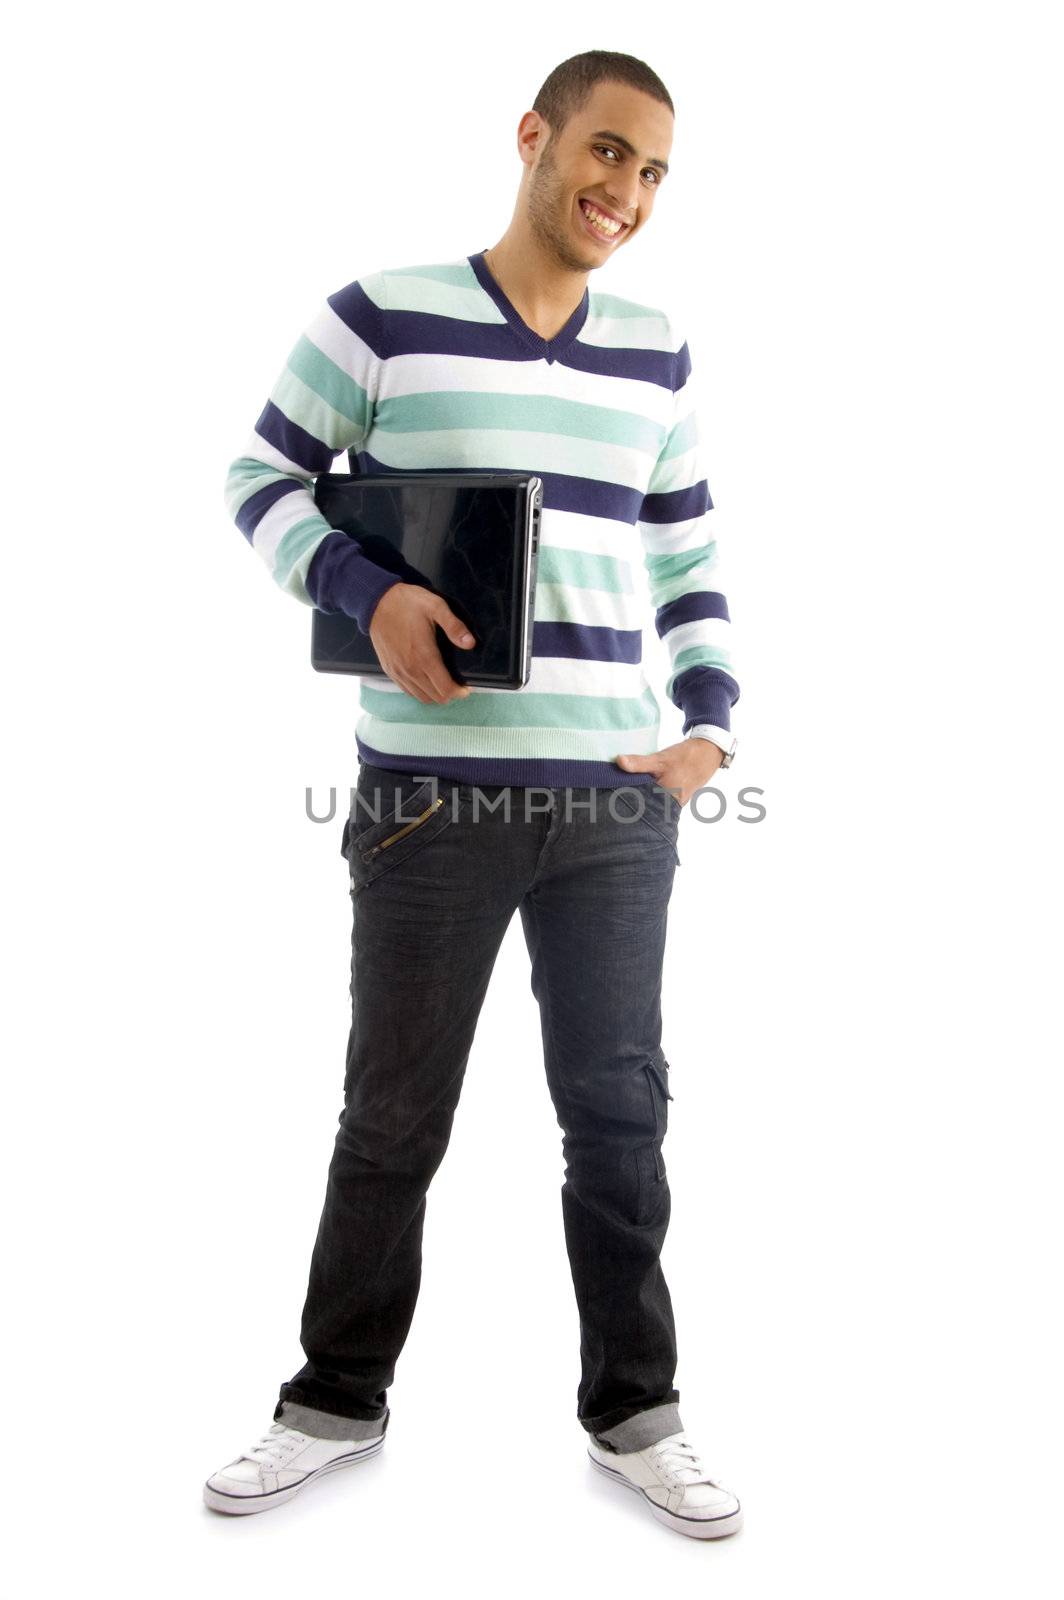 college boy holding laptop with white background